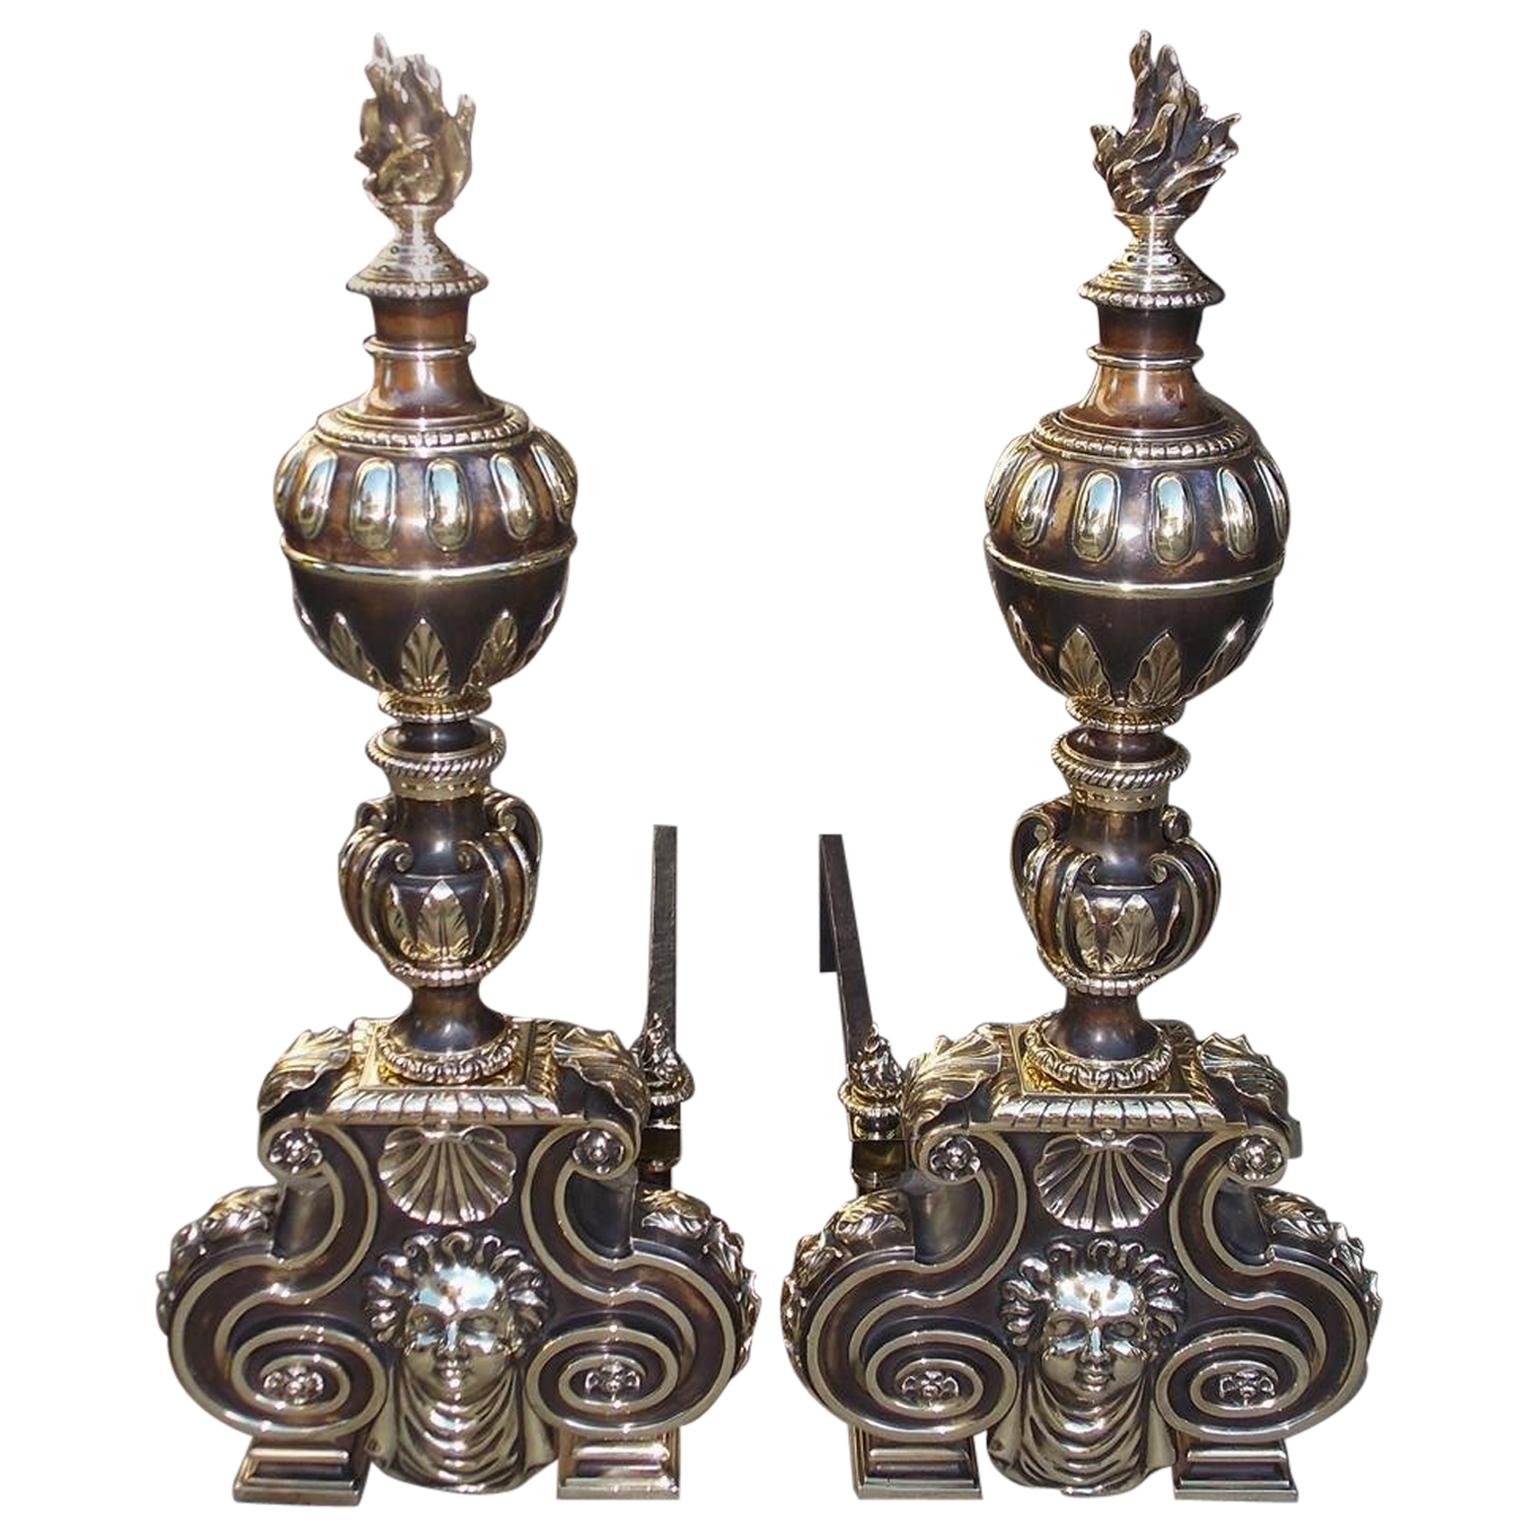 Pair of American Bronze Figural and Ball Top Flame Finial Andirons, N.Y. C. 1880